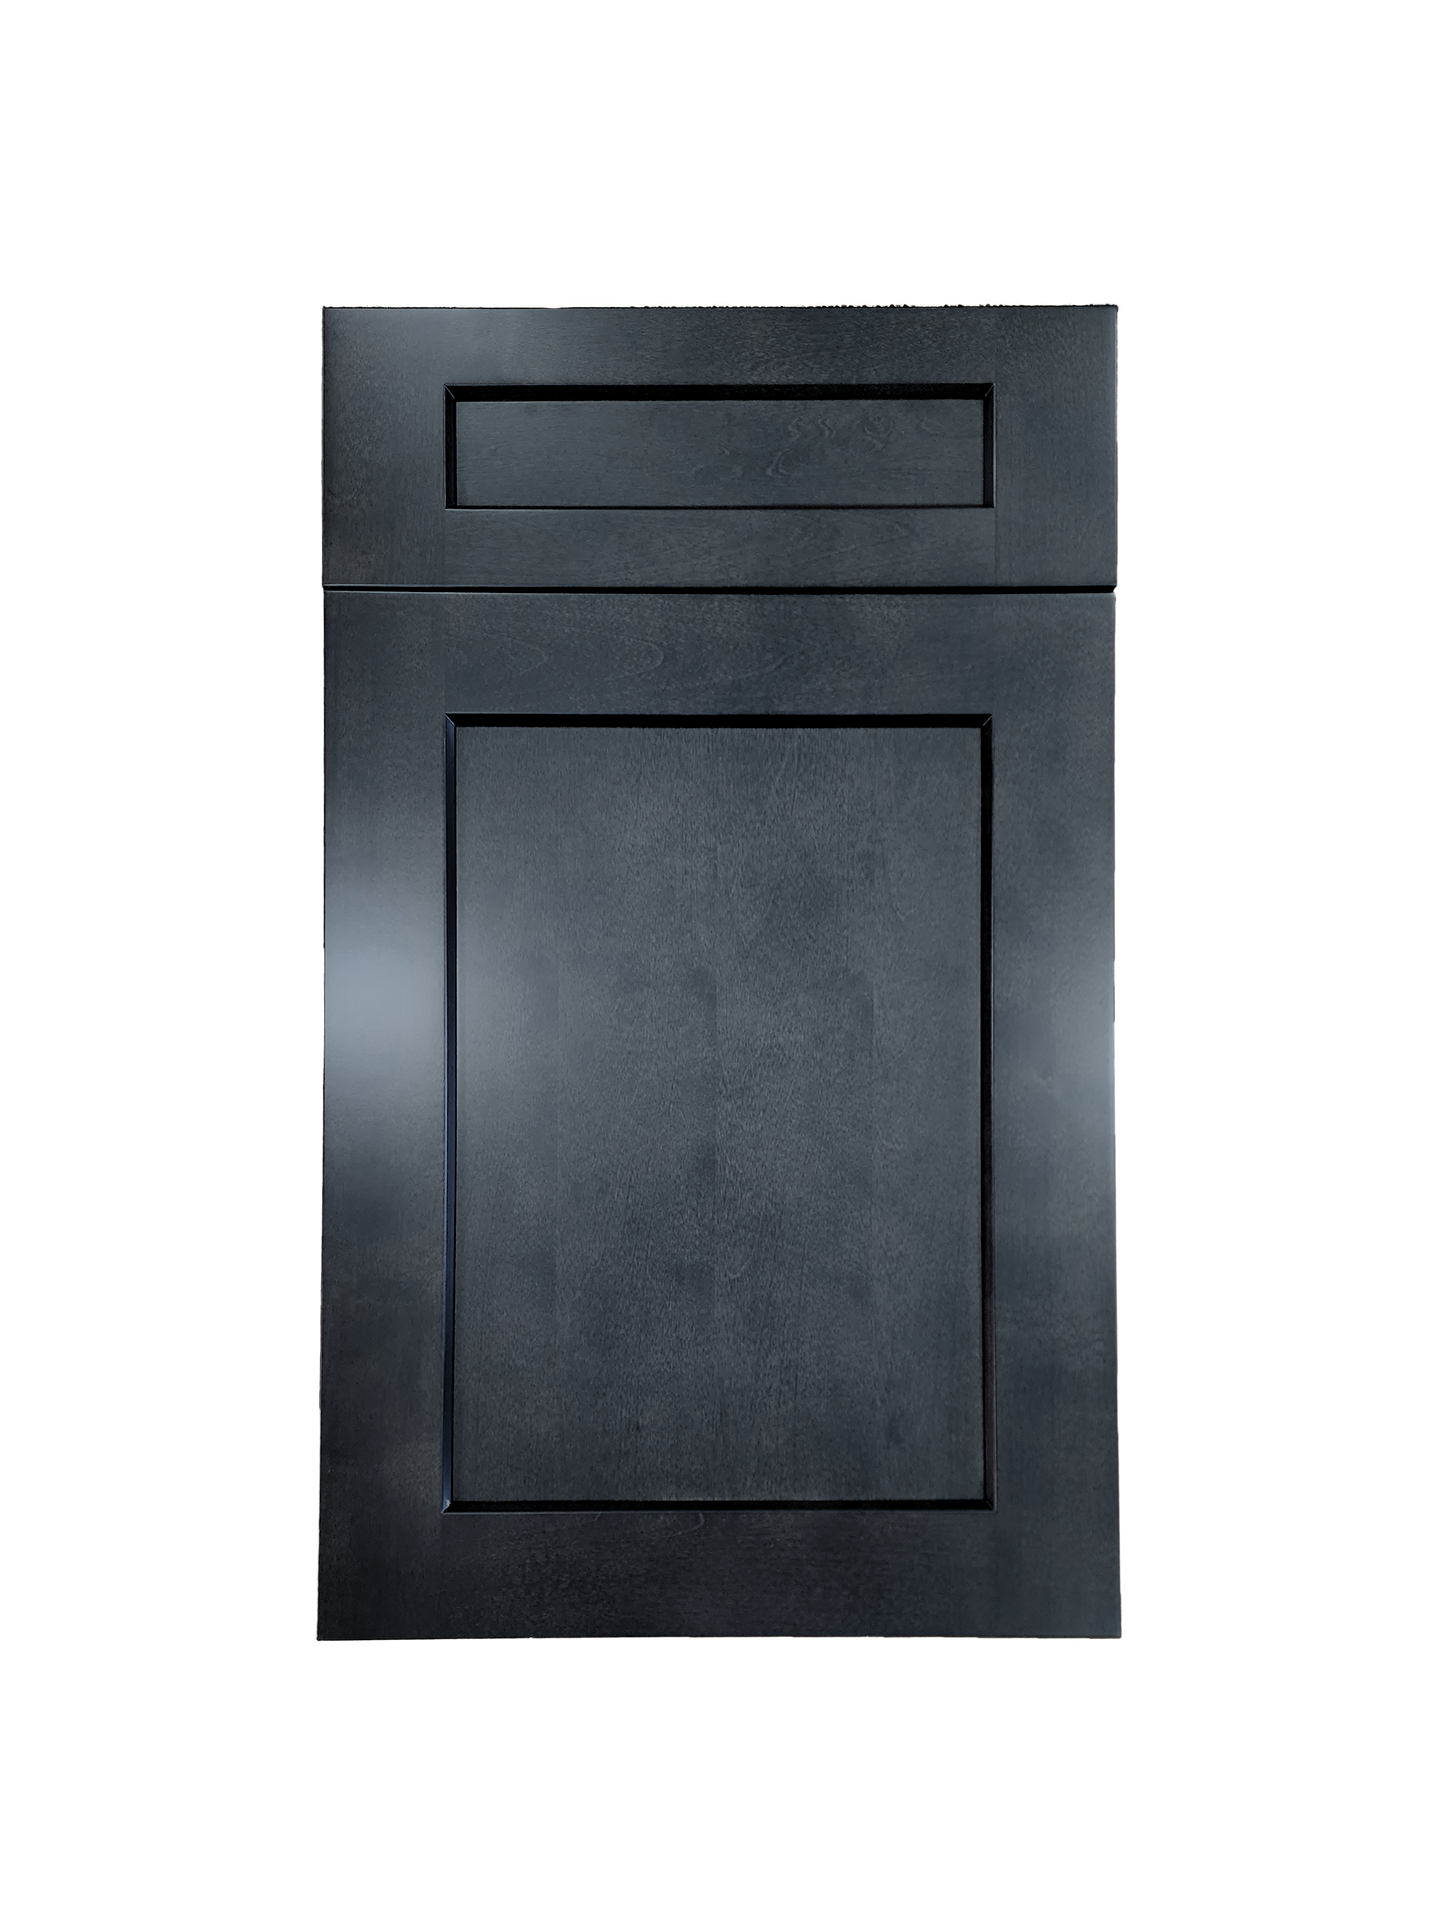 Stormy Grey Wall Cabinet 24 inches wide 12 inches deep 42 inches tall with Stormy Grey box and Stormy Grey doors